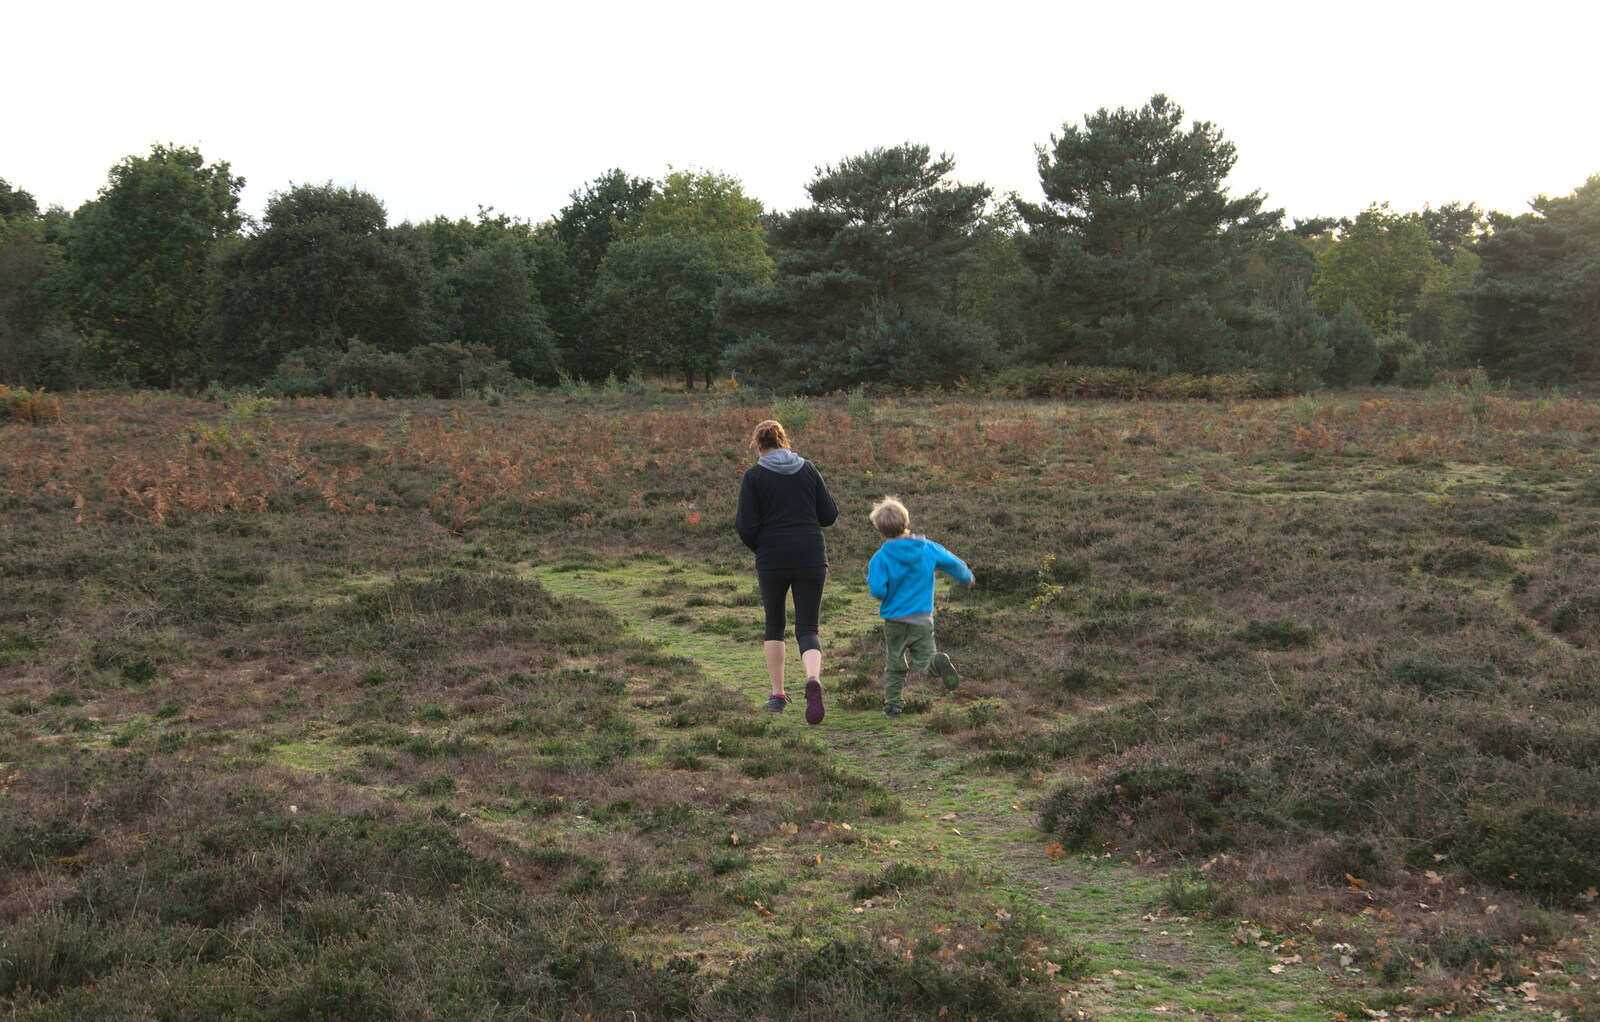 Isobel and Harry run around on the heath from Evidence of Autumn: Geocaching on Knettishall Heath, Suffolk - 7th October 2018